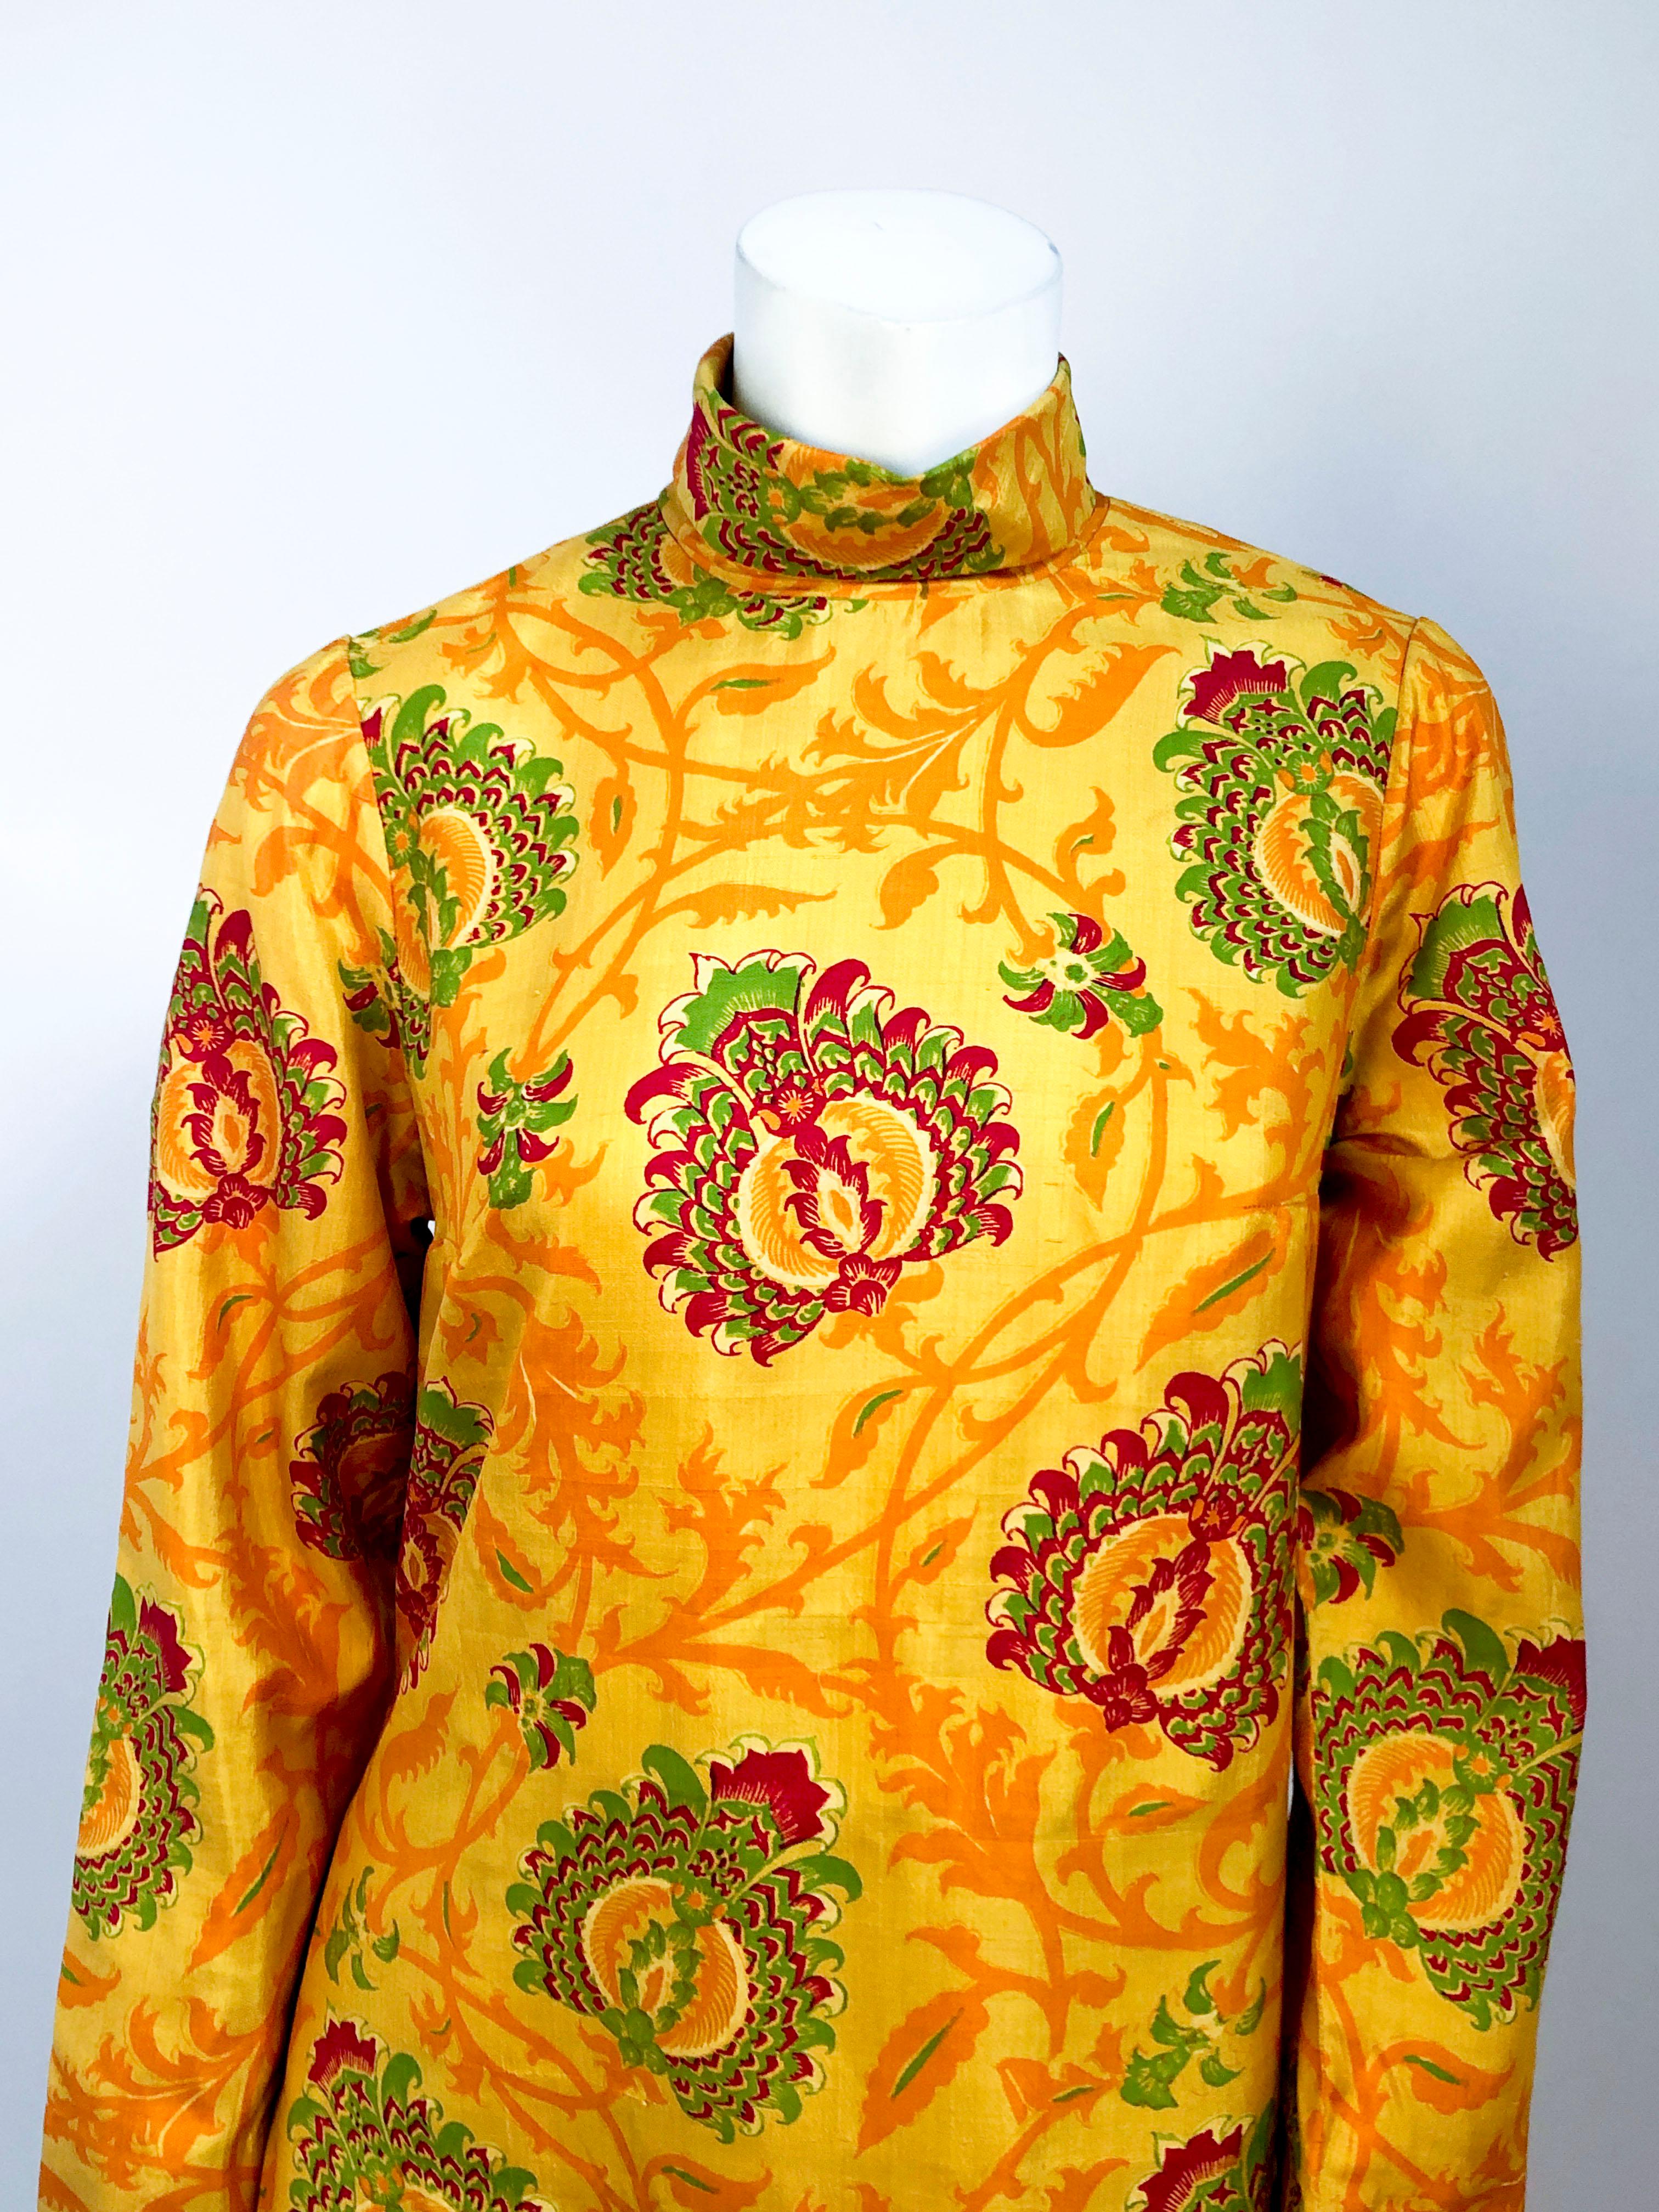 Ornate printed silk full length tunic in neon oranges, reds, and greens with long sleeves, high neck, and high side vents. the Pants have a complementary boarder print that extenuates the wide legs and high waist. Due to the vents on the sides of